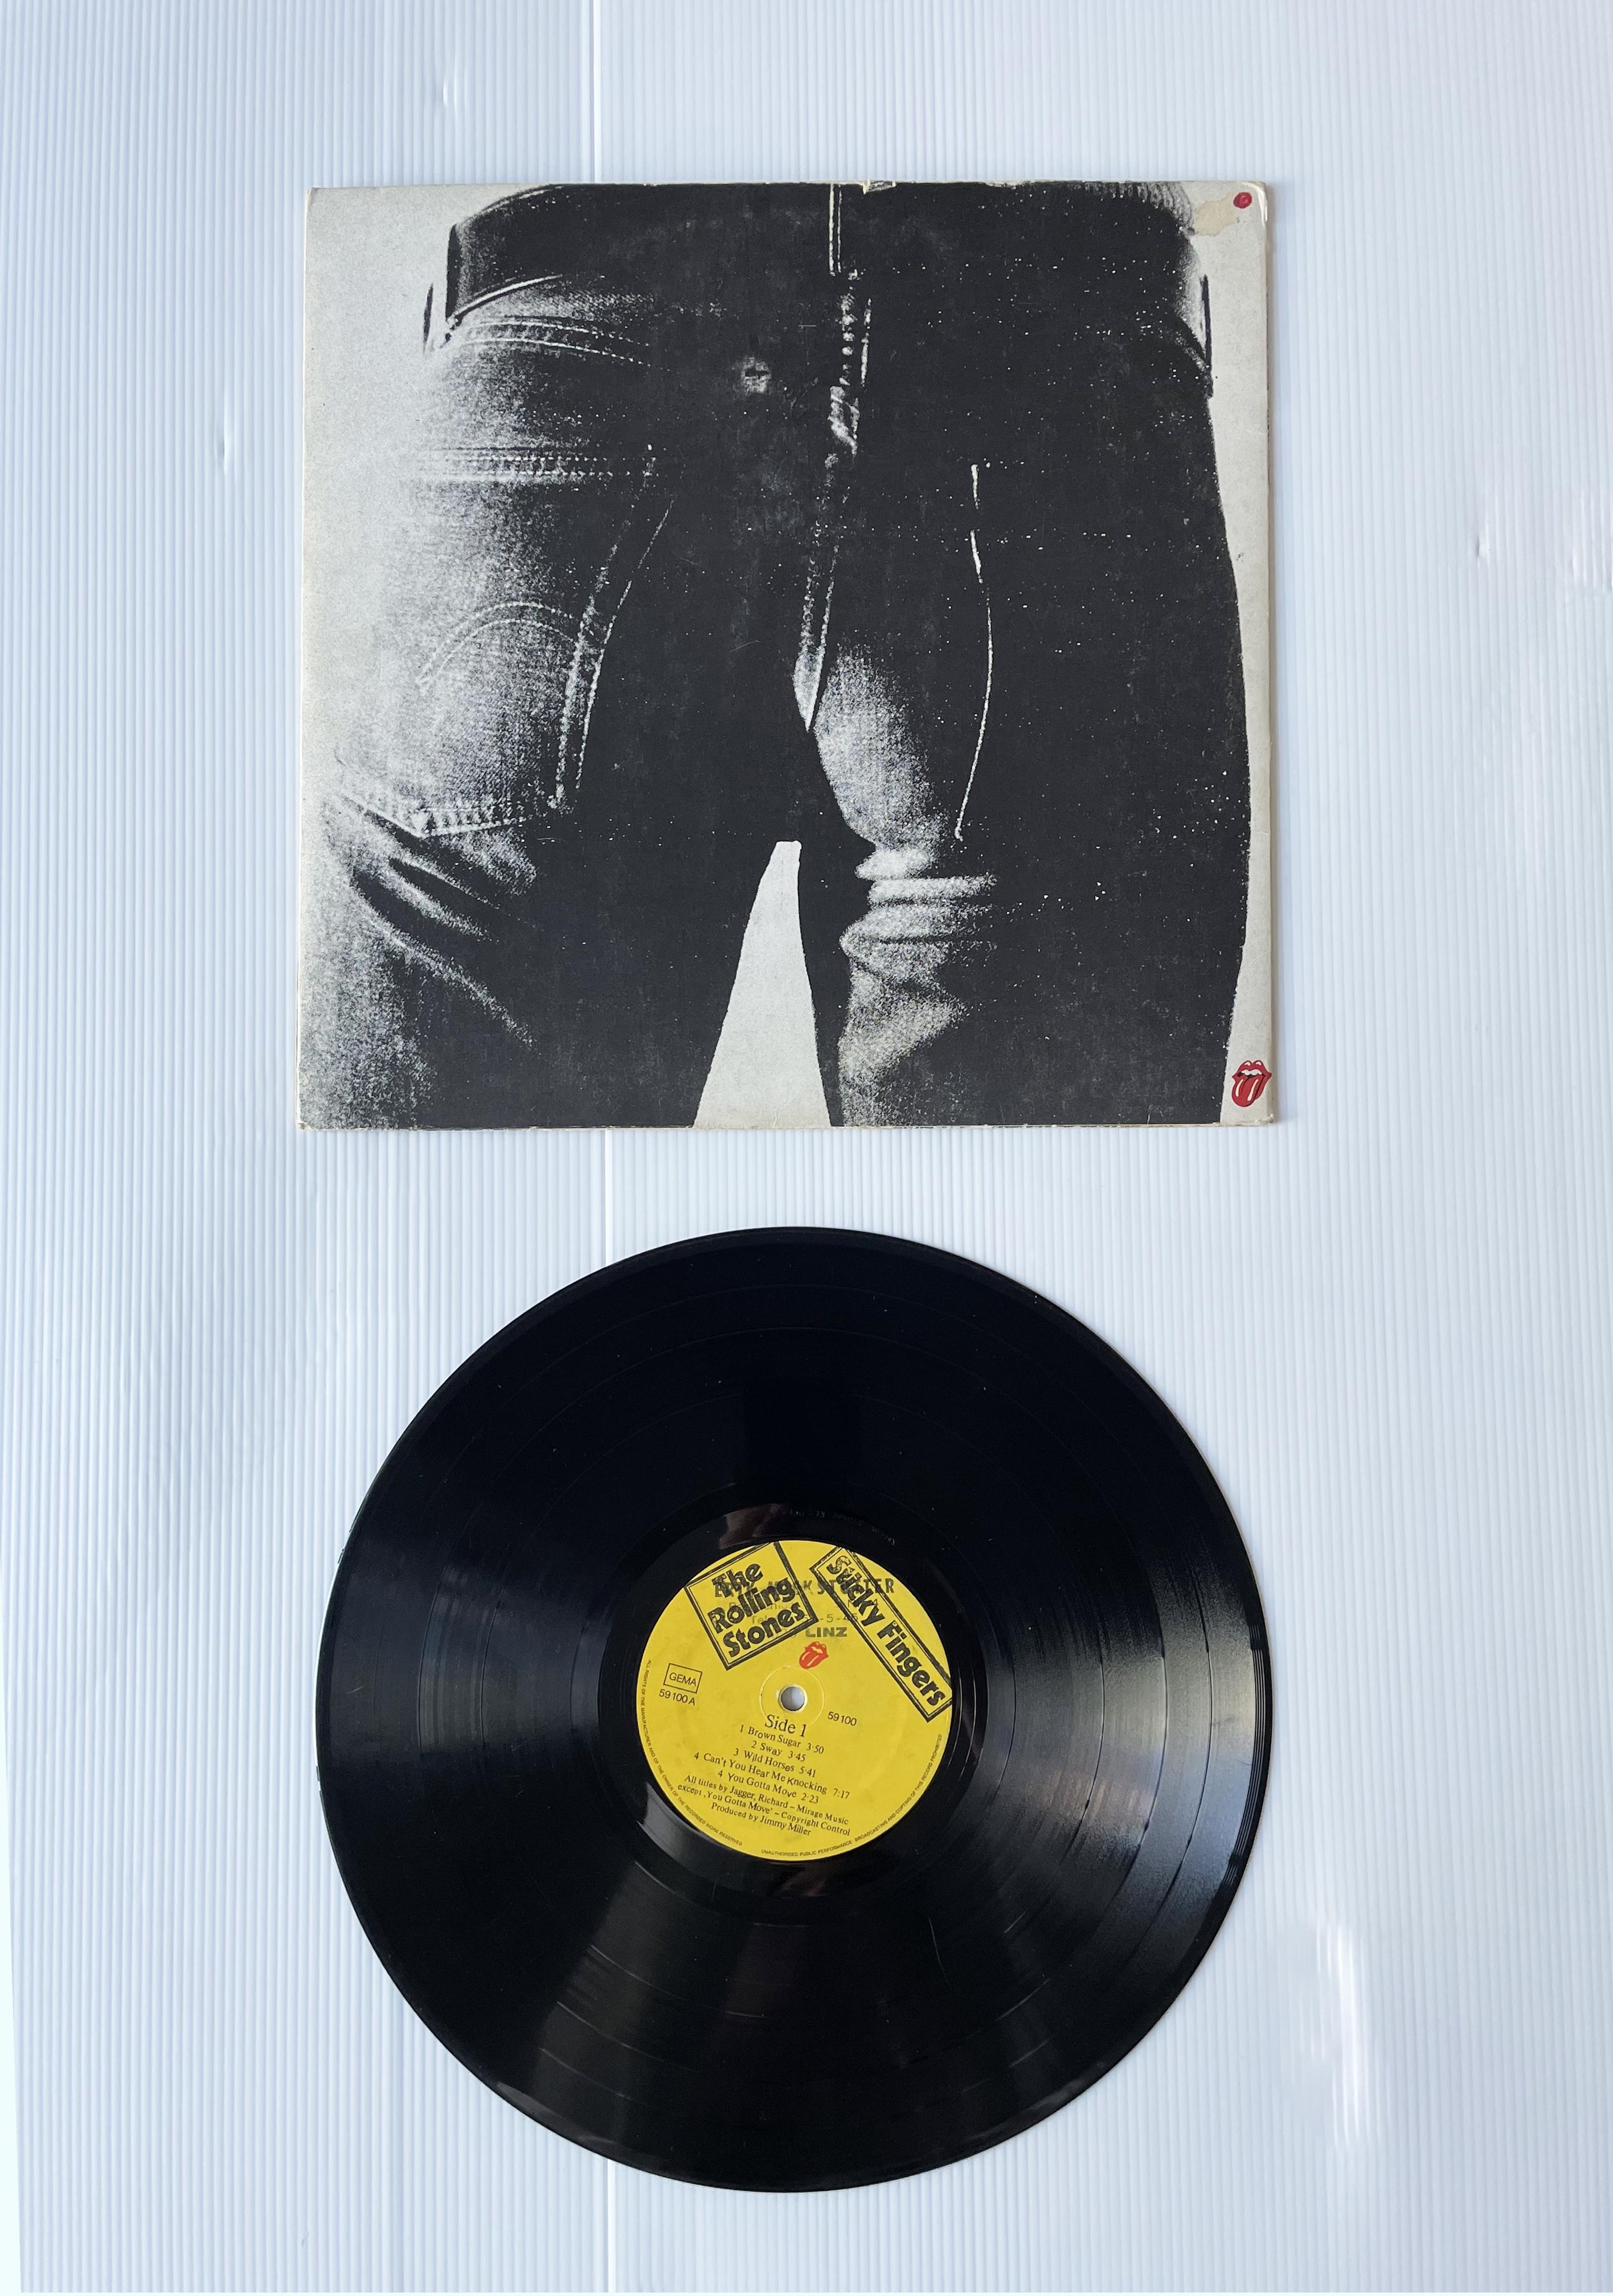 The Rolling Stones, Sticky Fingers, LP, 1971 im Angebot 3